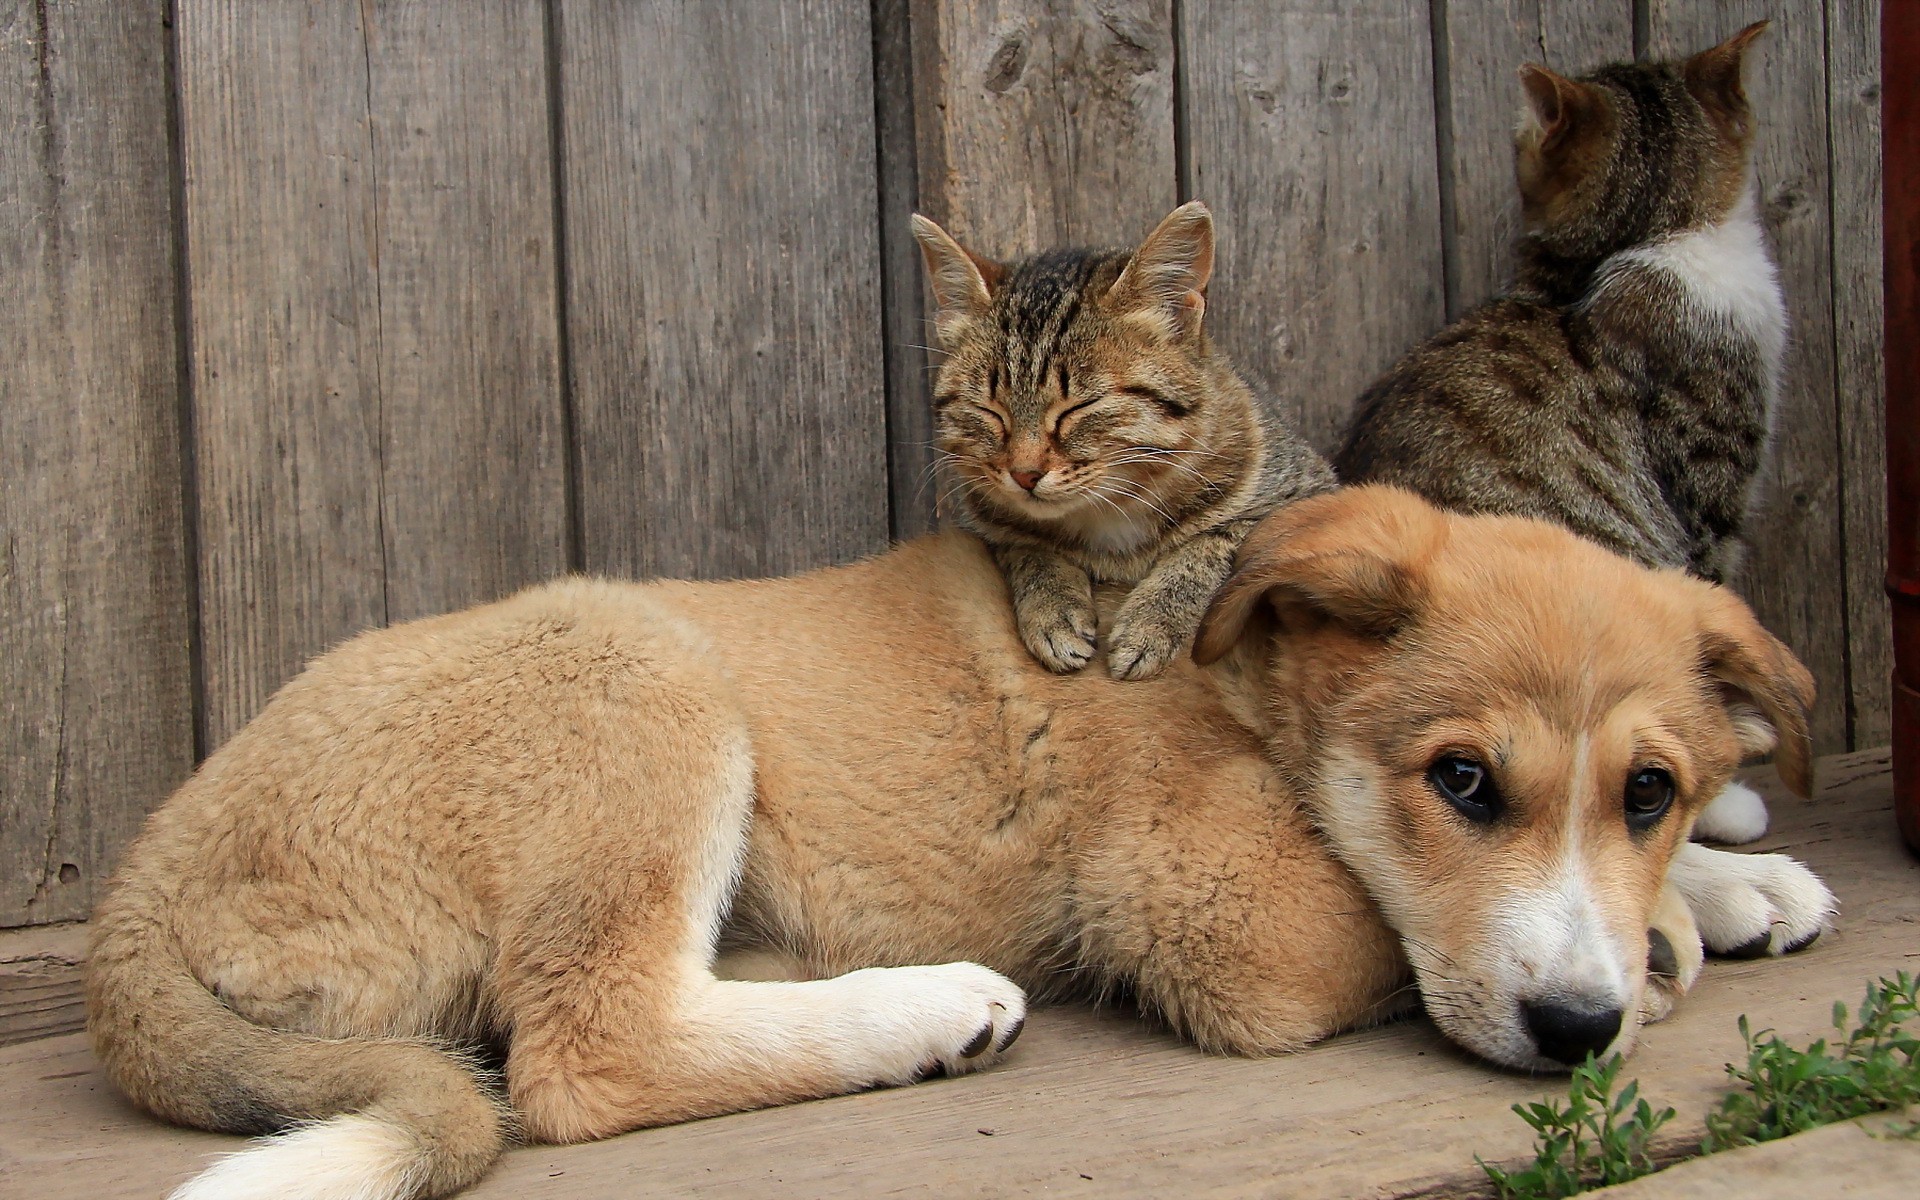 Dog and Cat Wallpaper (53+ images)